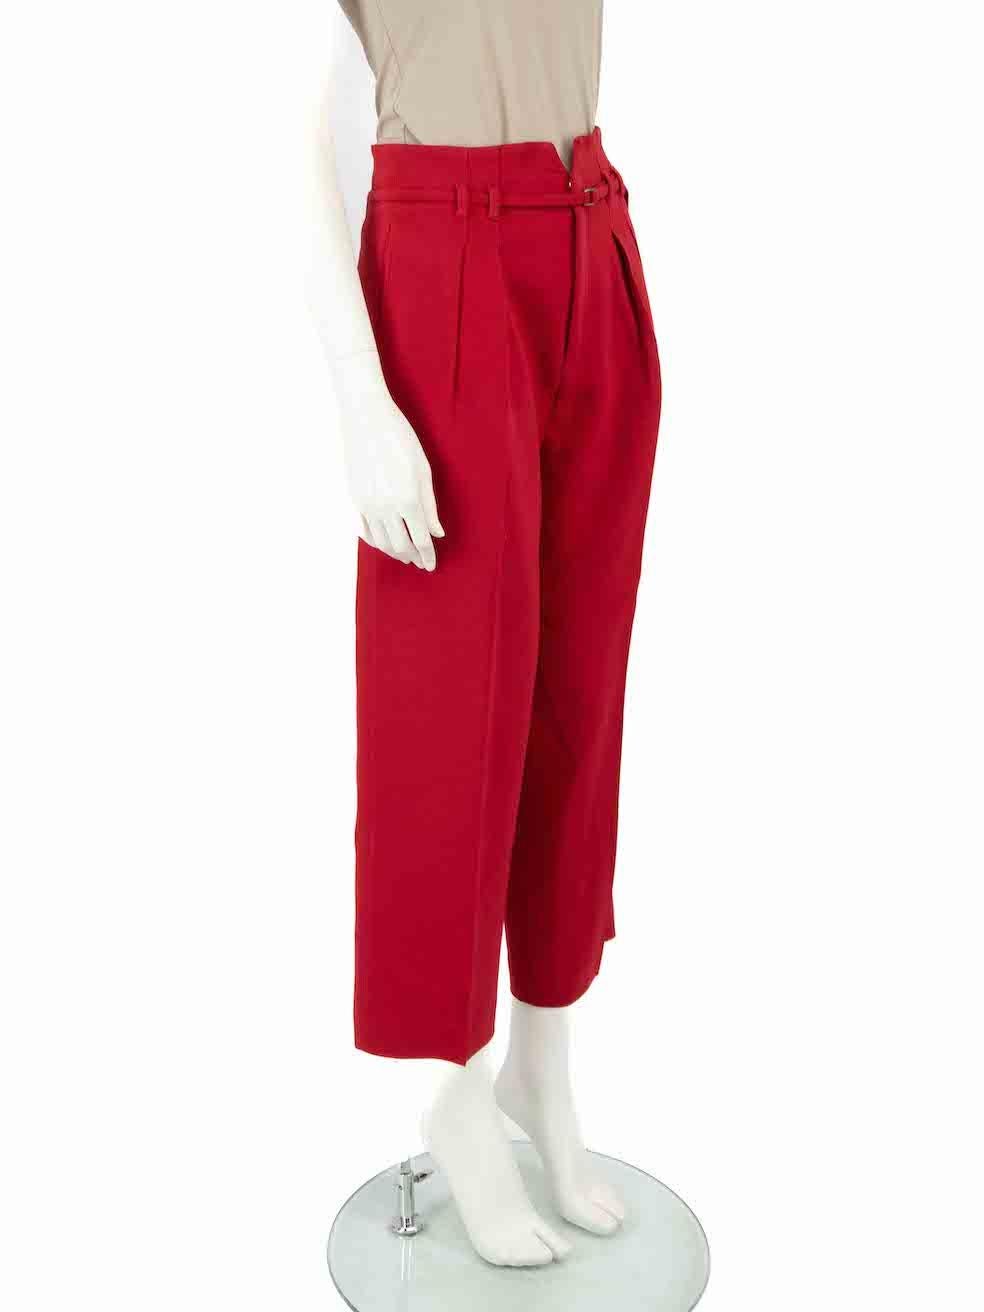 CONDITION is Very good. Minimal wear to trousers is evident. Minimal wear to the front-right leg with plucks to the weave on this used RED Valentino designer resale item.
 
 
 
 Details
 
 
 Red
 
 Synthetic
 
 Trousers
 
 Belted
 
 High rise
 
